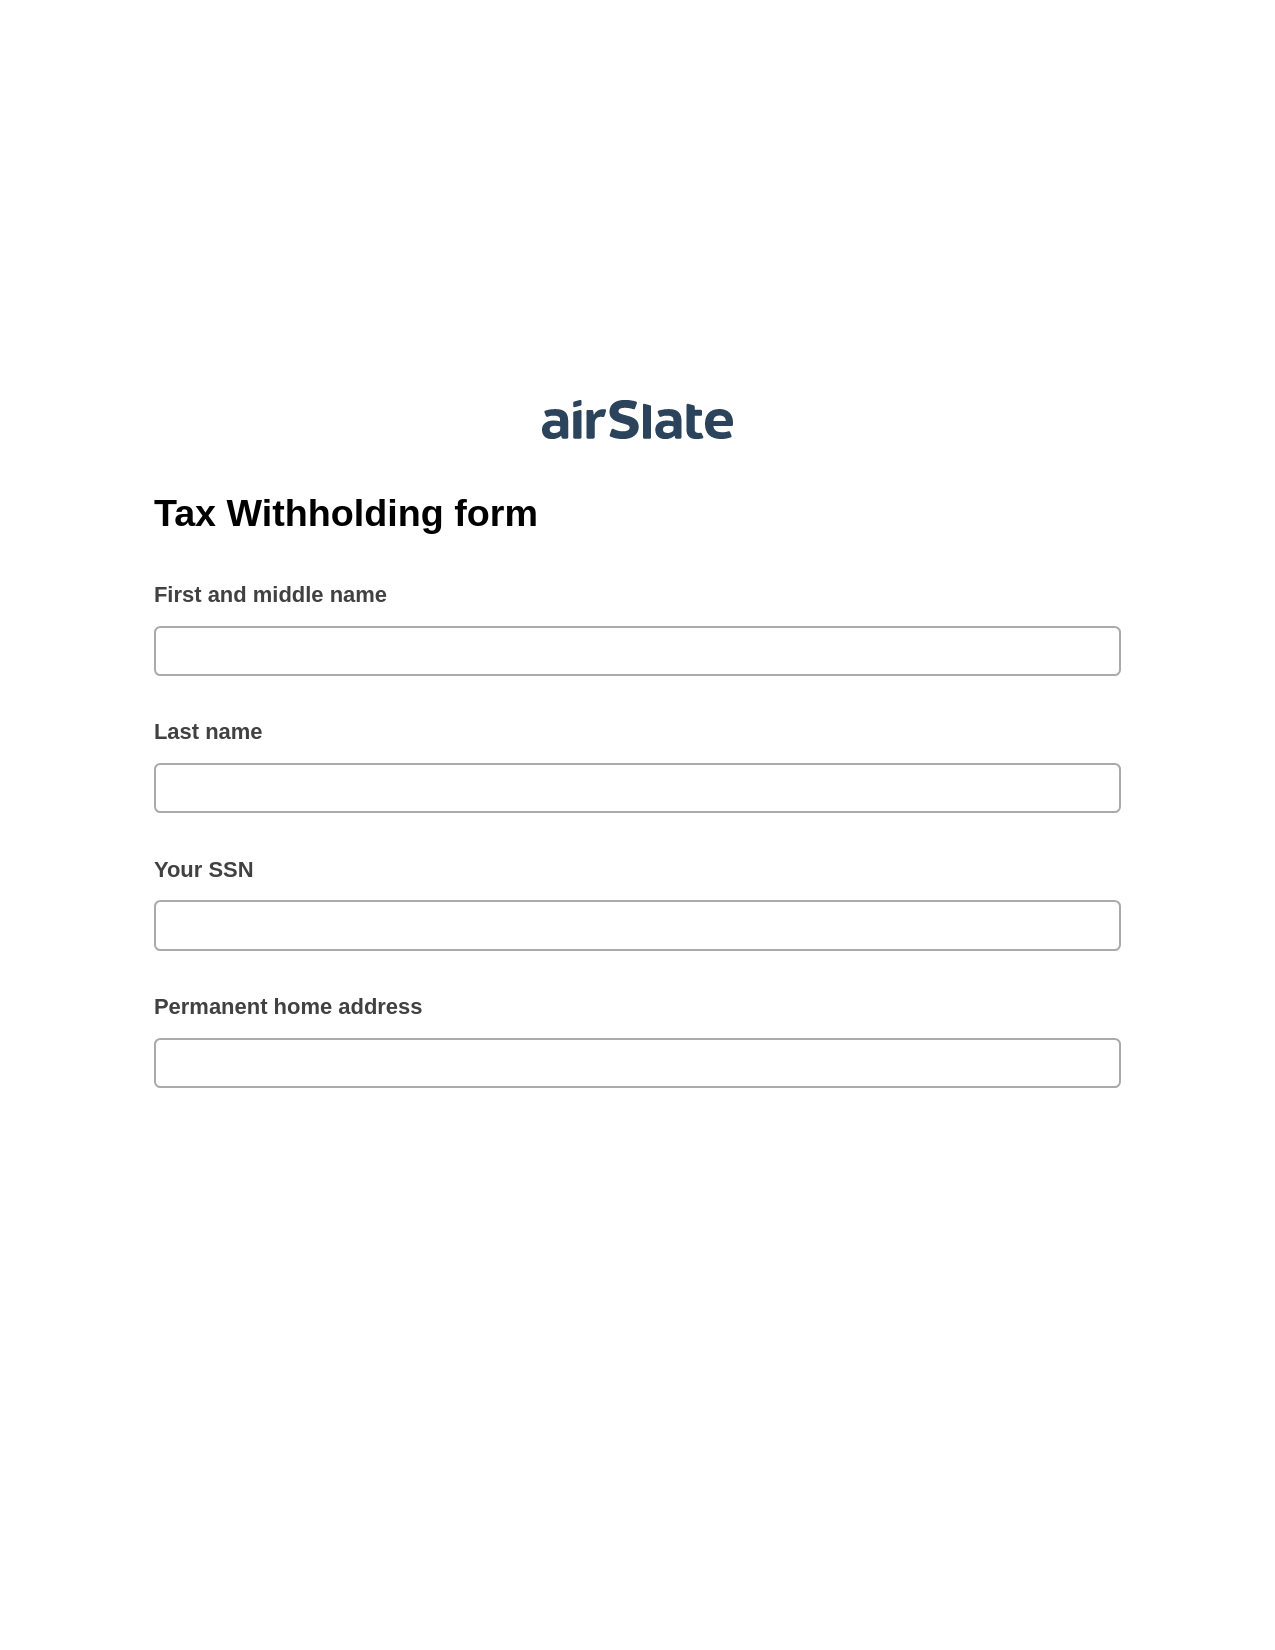 Multirole Tax Withholding form Pre-fill Document Bot, Create Slate every Google Sheet Update Bot, Export to Excel 365 Bot